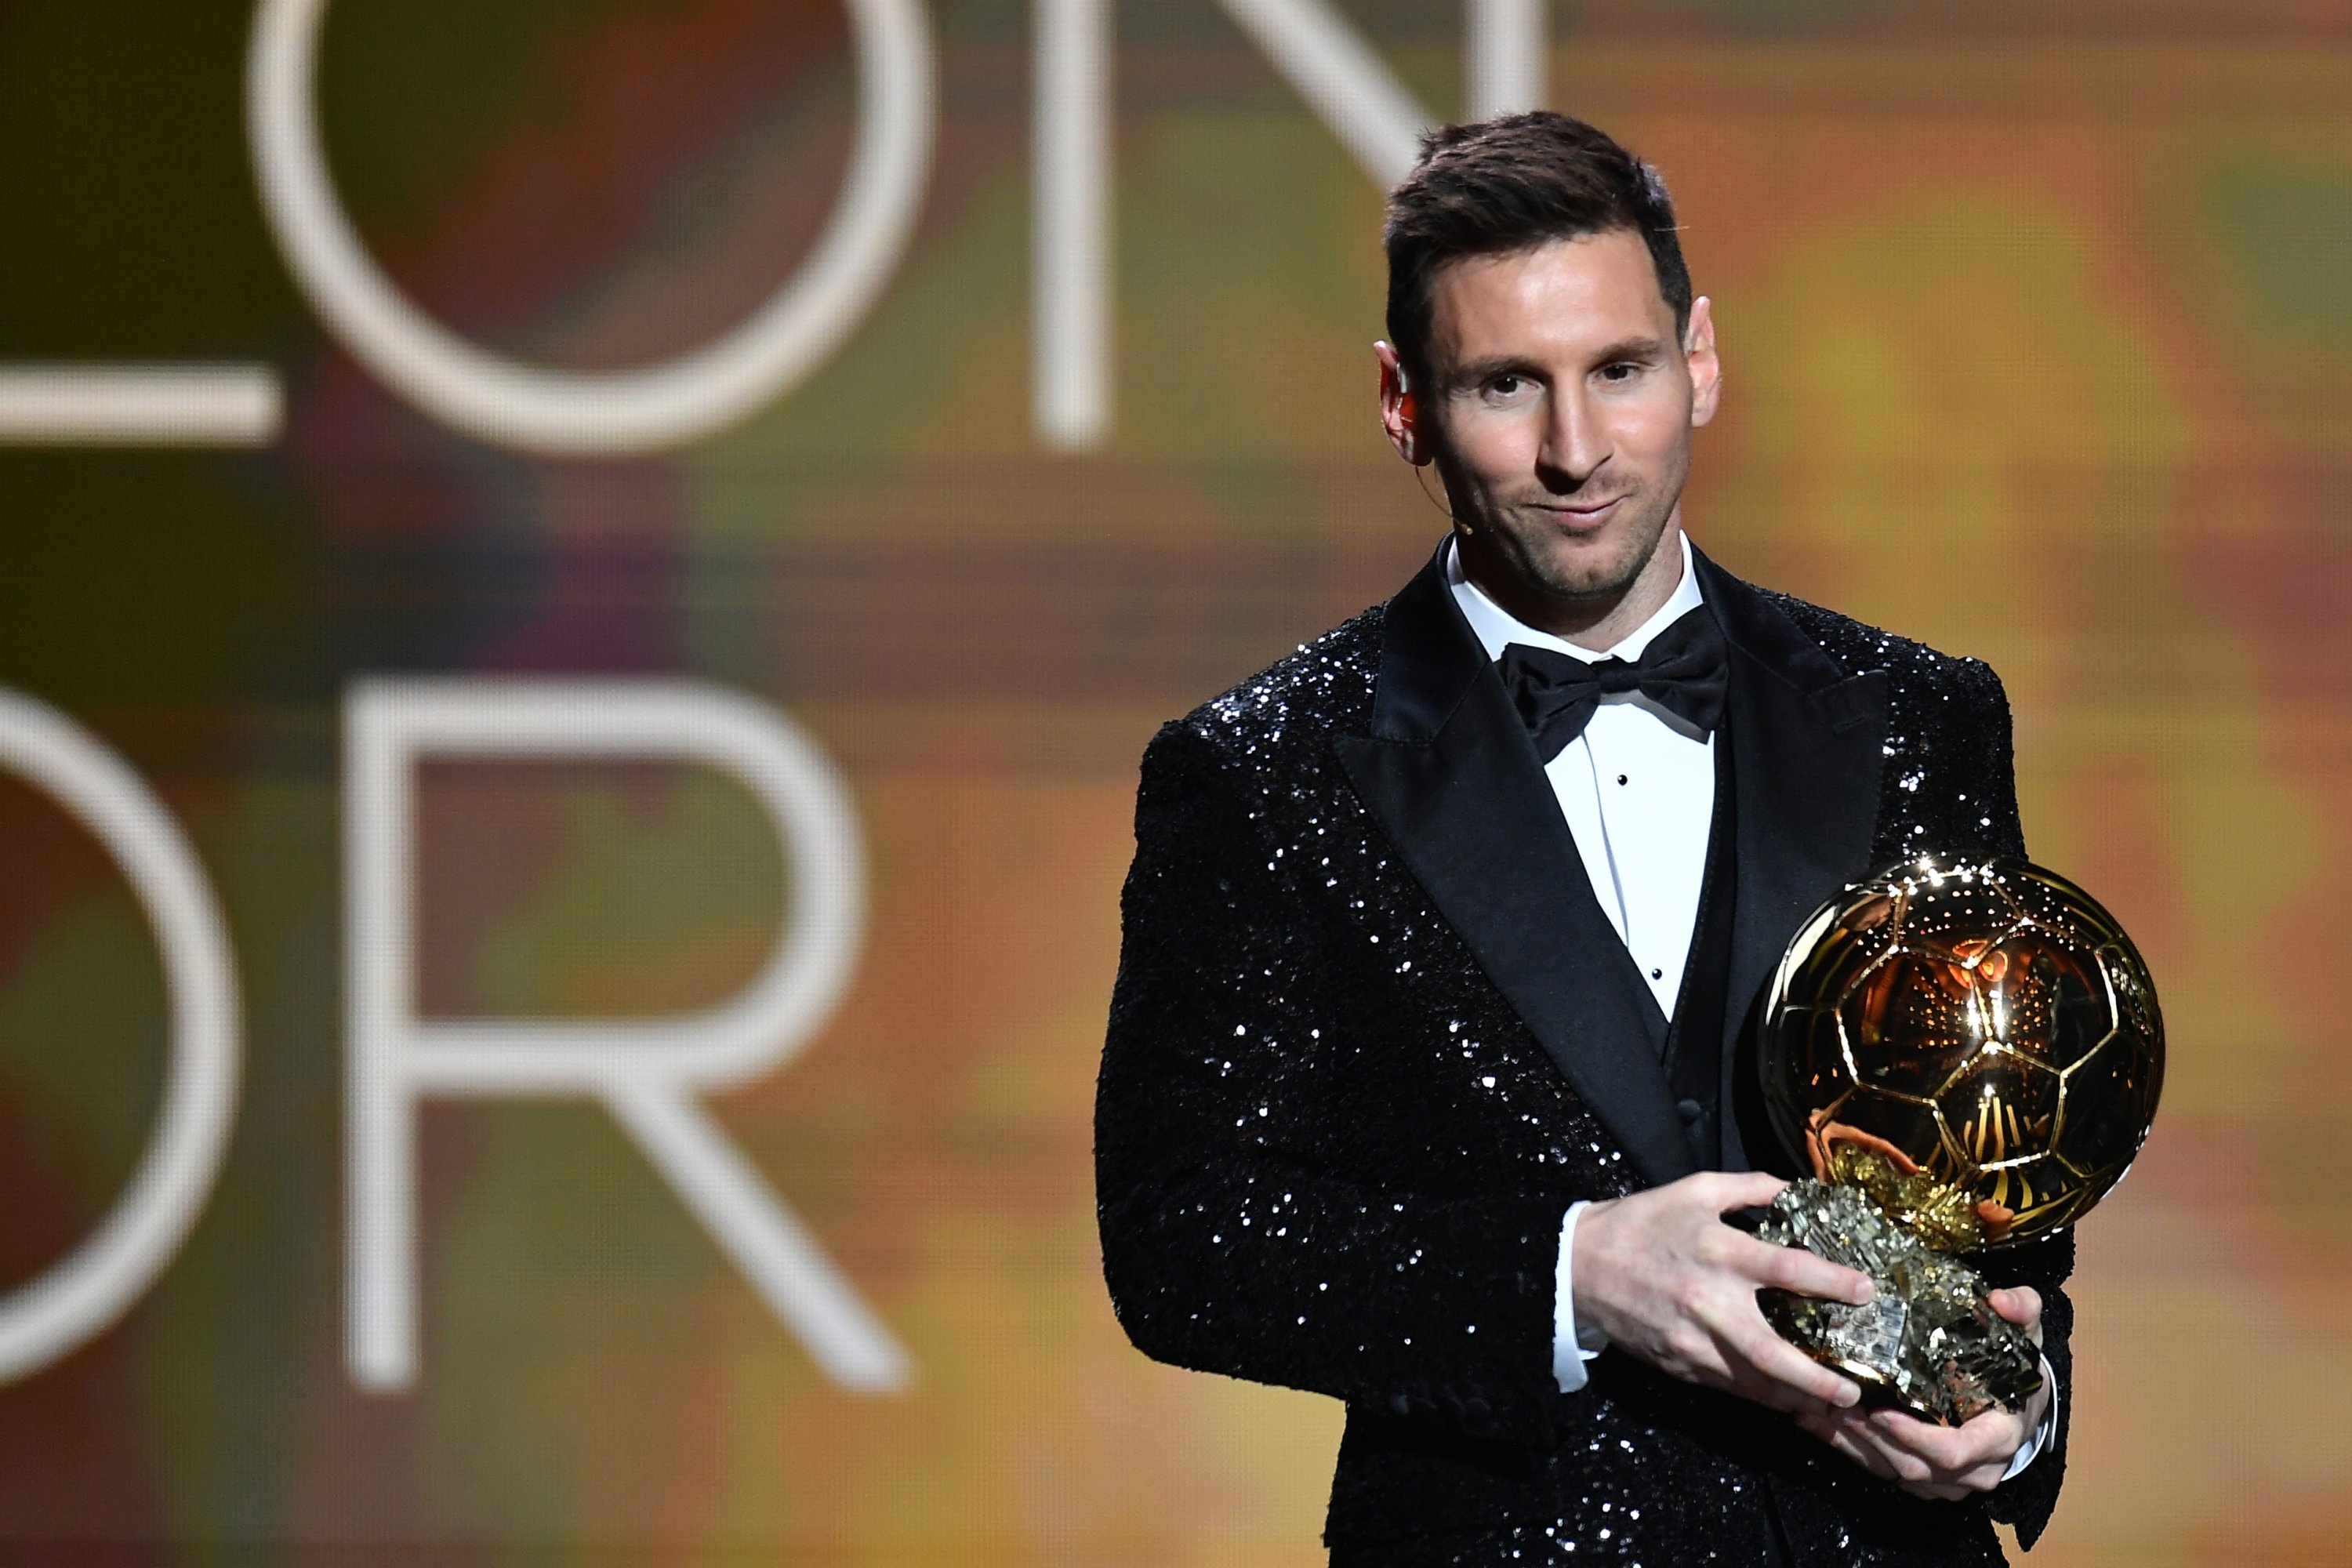 Lionel Messi favorite to clinch recordextending 8th Ballon d’Or